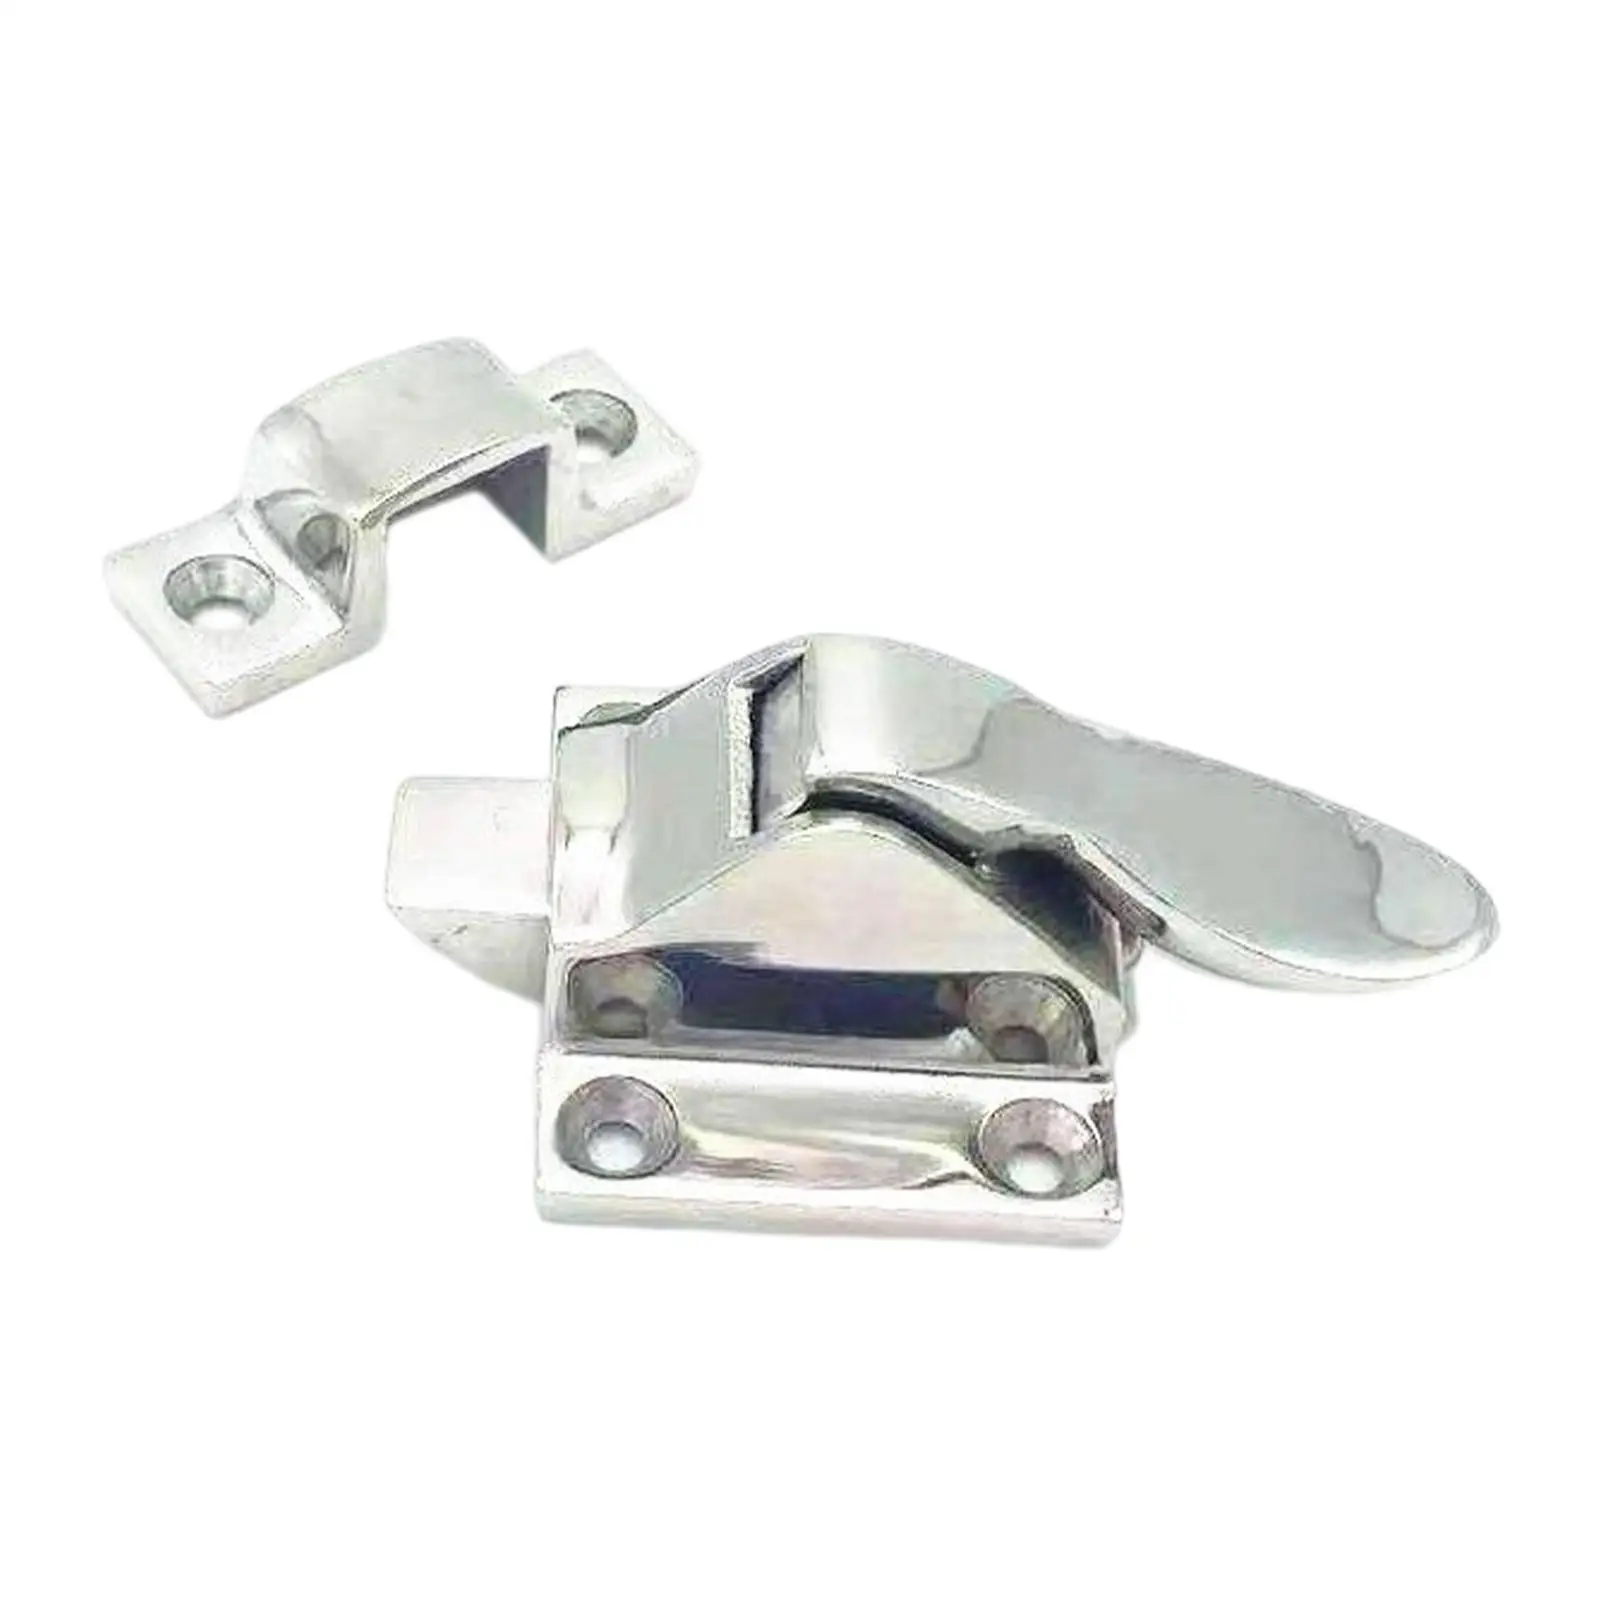 Stainless Steel Boat Latch Catch Hardware Accessories Case Box Drawer Recessed Furniture Boat Cabinet Hatch Door Lock Yachts